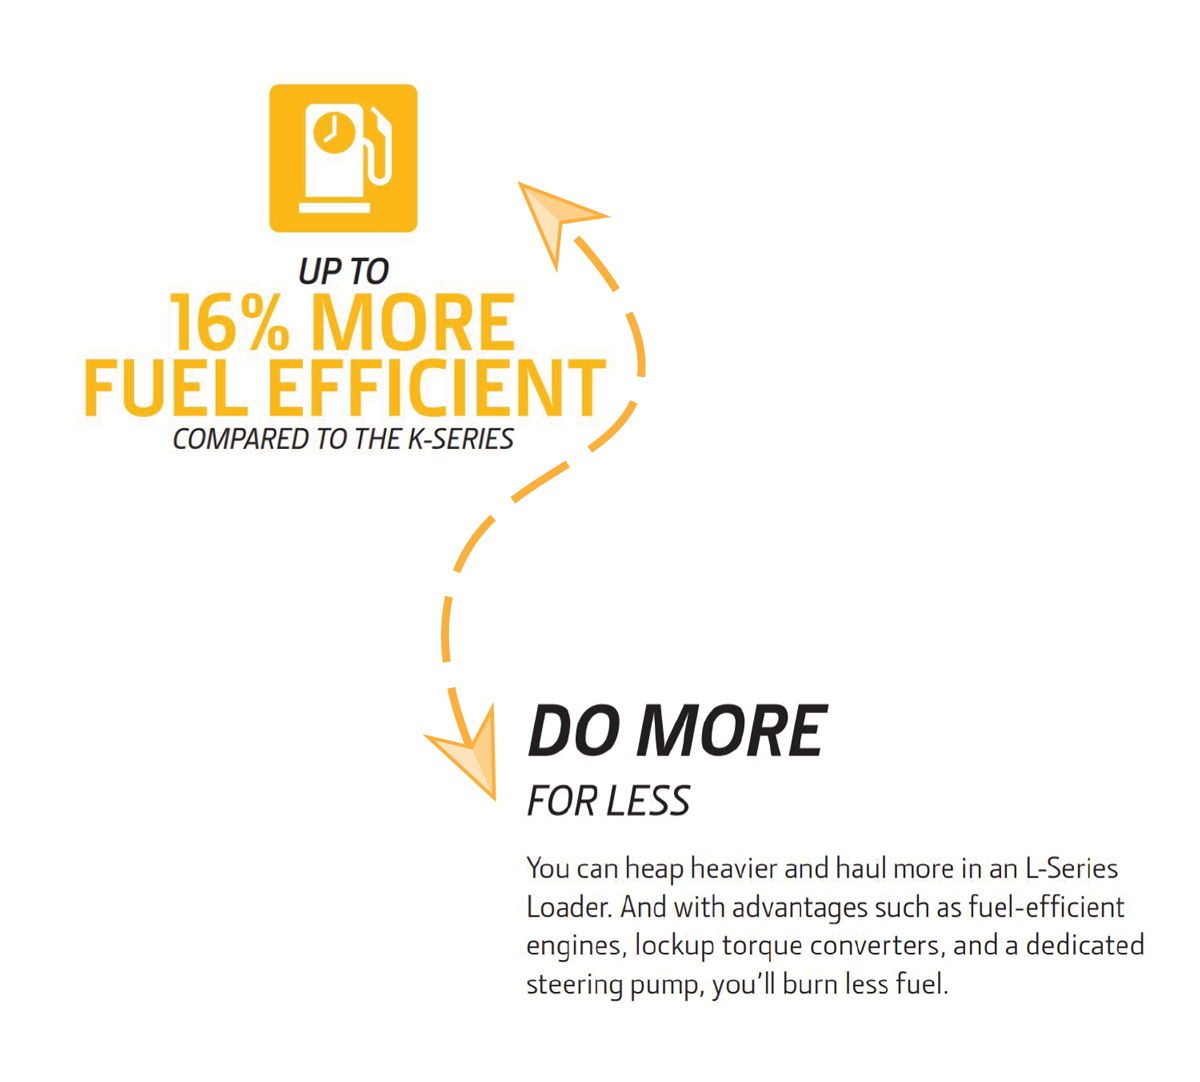 Up to 16% More Fuel Efficient, Do More For Less